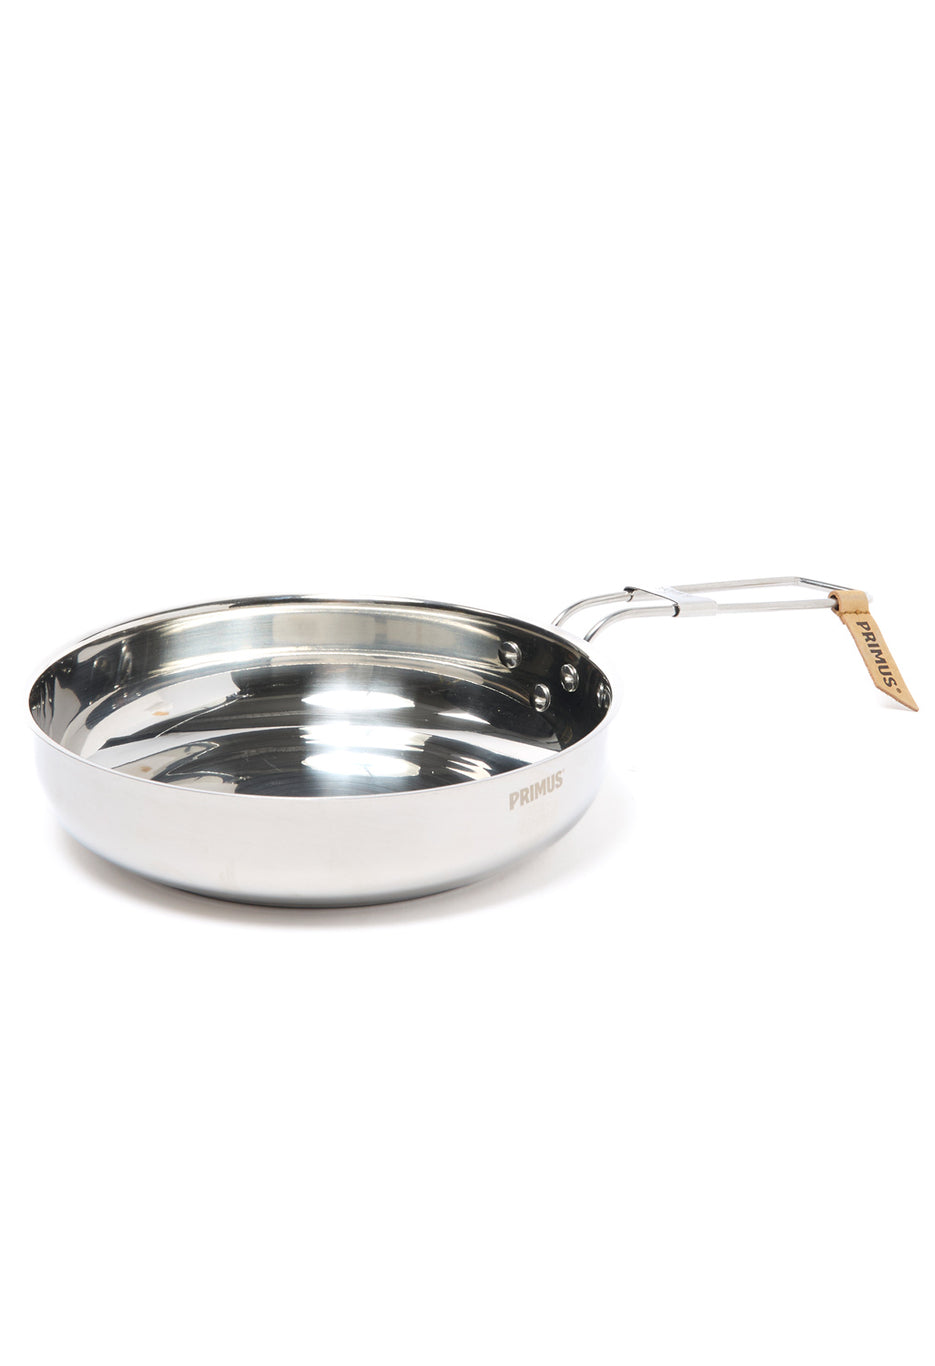 Primus CampFire Frying Pan